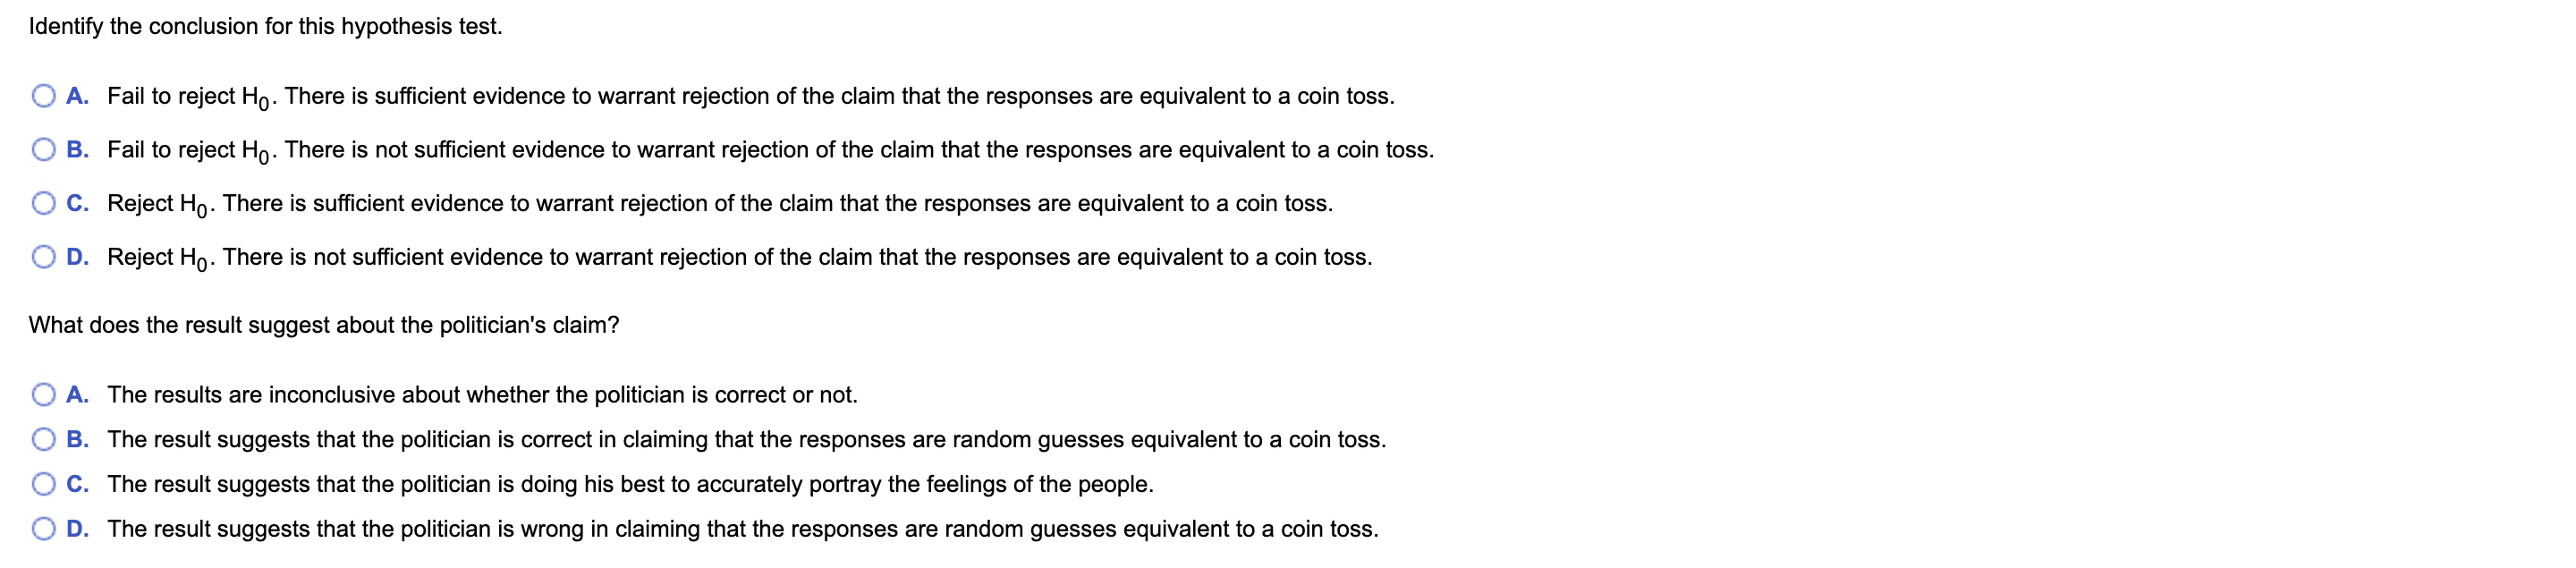 Identify the conclusion for this hypothesis test.
A. Fail to reject Ho. There is sufficient evidence to warrant rejection of the claim that the responses are equivalent to a coin toss.
B. Fail to reject Ho. There is not sufficient evidence to warrant rejection of the claim that the responses are equivalent to a coin toss.
C. Reject Ho. There is sufficient evidence to warrant rejection of the claim that the responses are equivalent to a coin toss.
D. Reject Ho. There is not sufficient evidence to warrant rejection of the claim that the responses are equivalent to a coin toss.
What does the result suggest about the politician's claim?
A. The results are inconclusive about whether the politician is correct or not.
B. The result suggests that the politician is correct in claiming that the responses are random guesses equivalent to a coin toss.
C. The result suggests that the politician is doing his best to accurately portray the feelings of the people.
D. The result suggests that the politician is wrong in claiming that the responses are random guesses equivalent to a coin toss.
